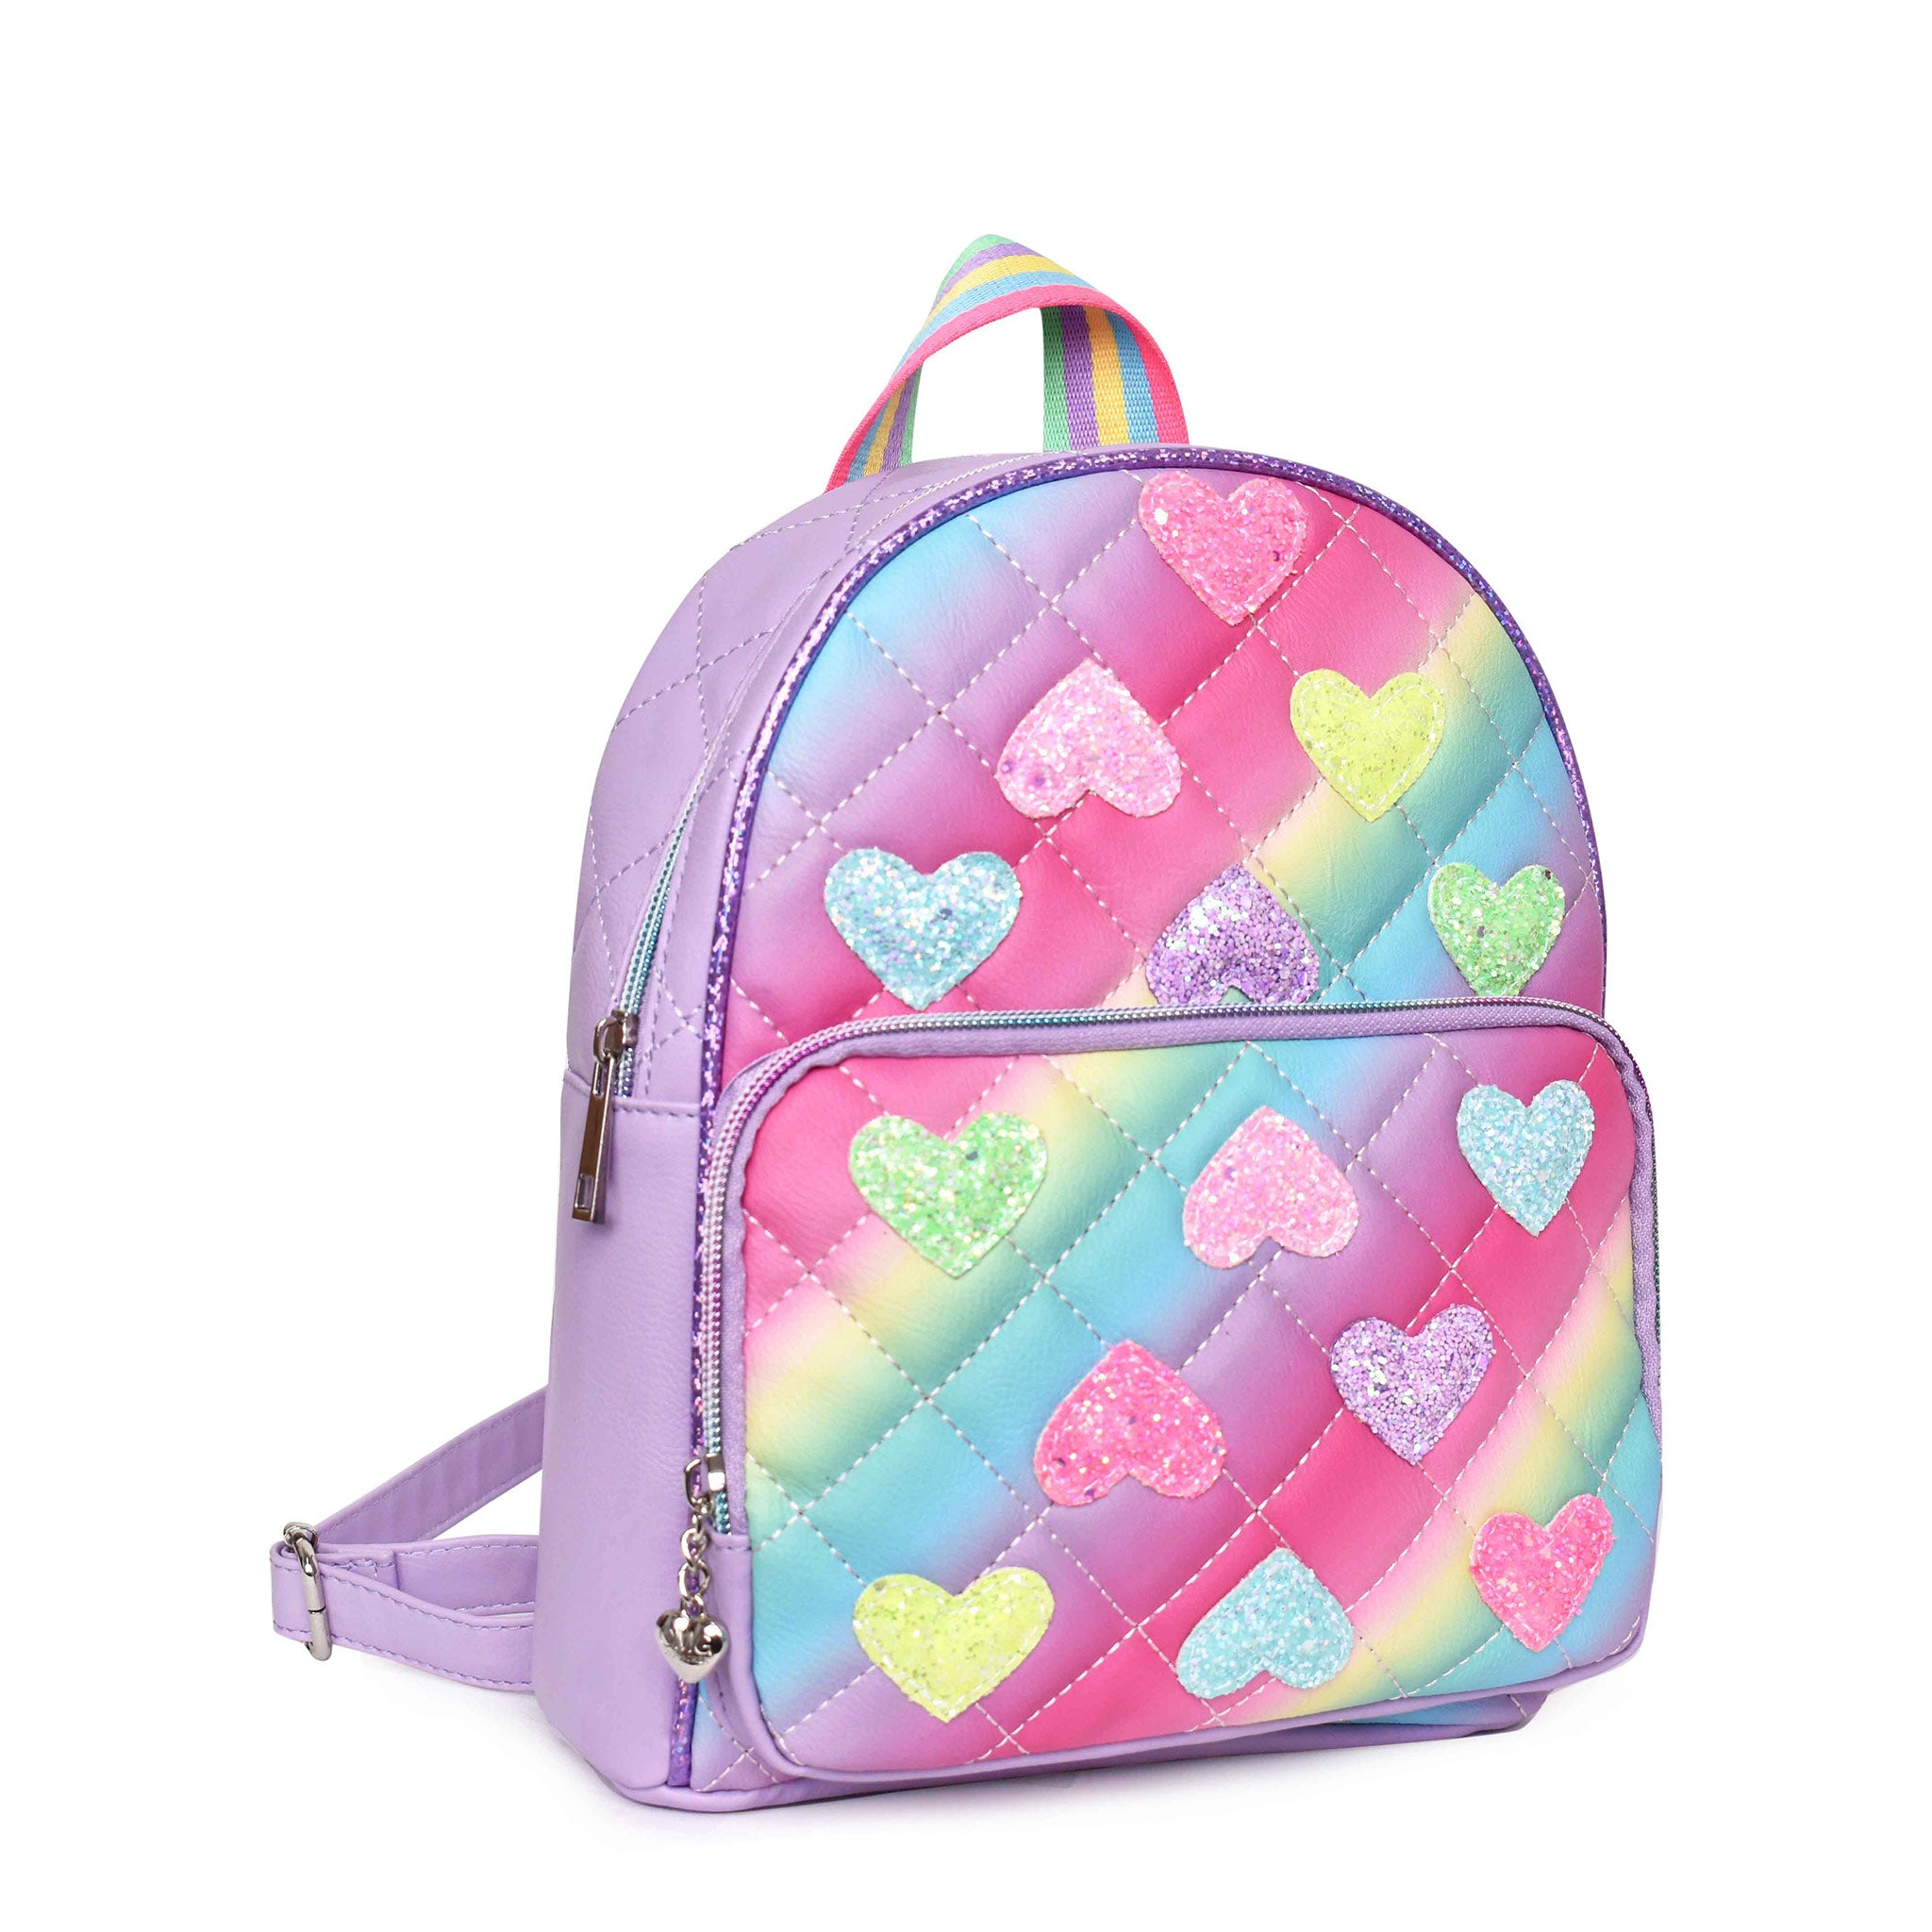 Side view of an ombre quilted mini backpack with glitter heart patches